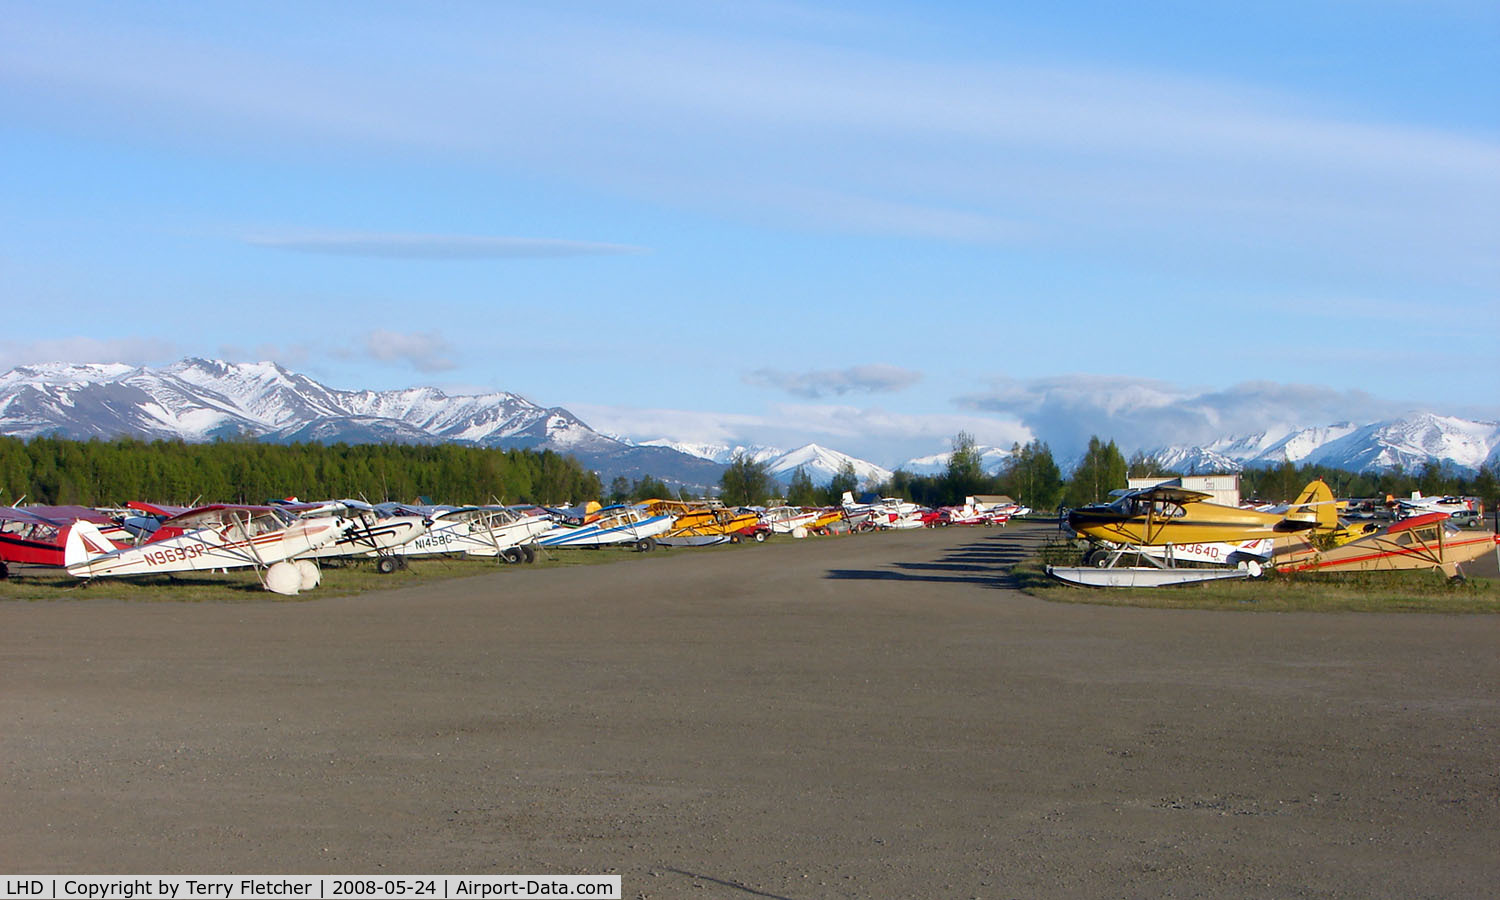 Lake Hood Seaplane Base (LHD) - Parked aircraft at Lake Hood - mostly tired aircraft that would use the gravel strip